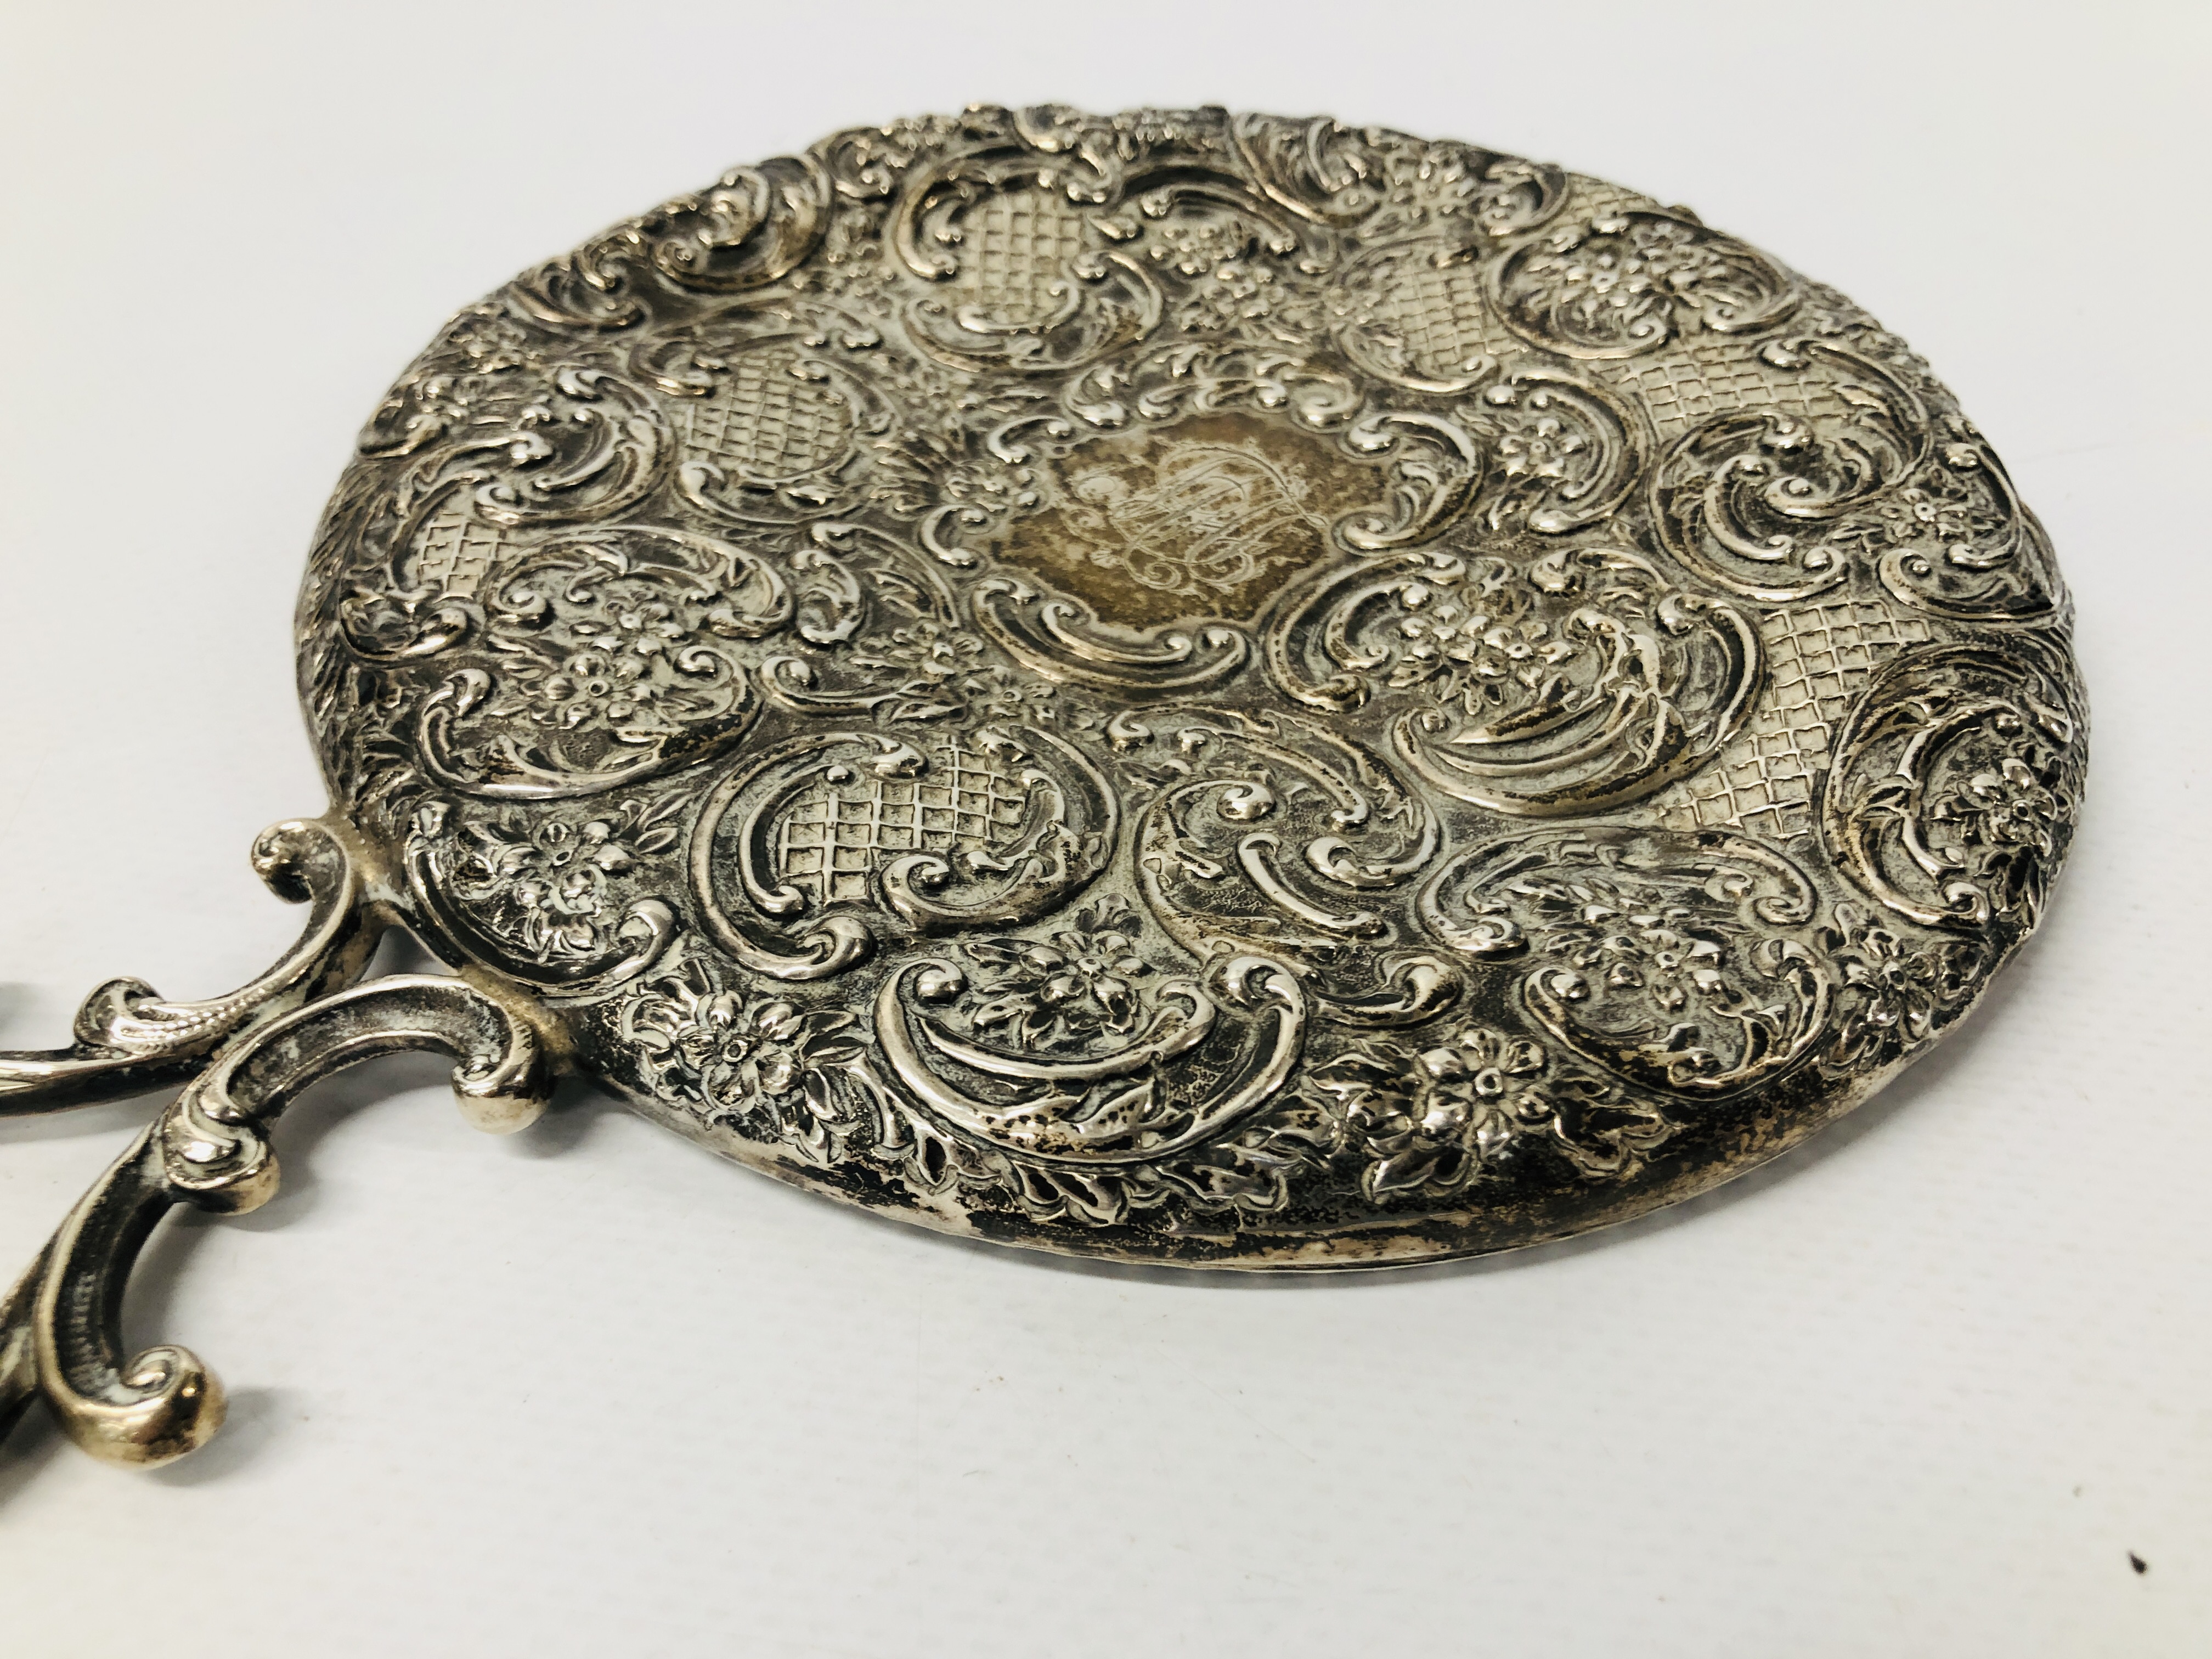 VINTAGE SILVER BACKED HAND HELD MIRROR ALONG WITH A VINTAGE SILVER DISH BIRMINGHAM ASSAY J.G. - Image 13 of 16